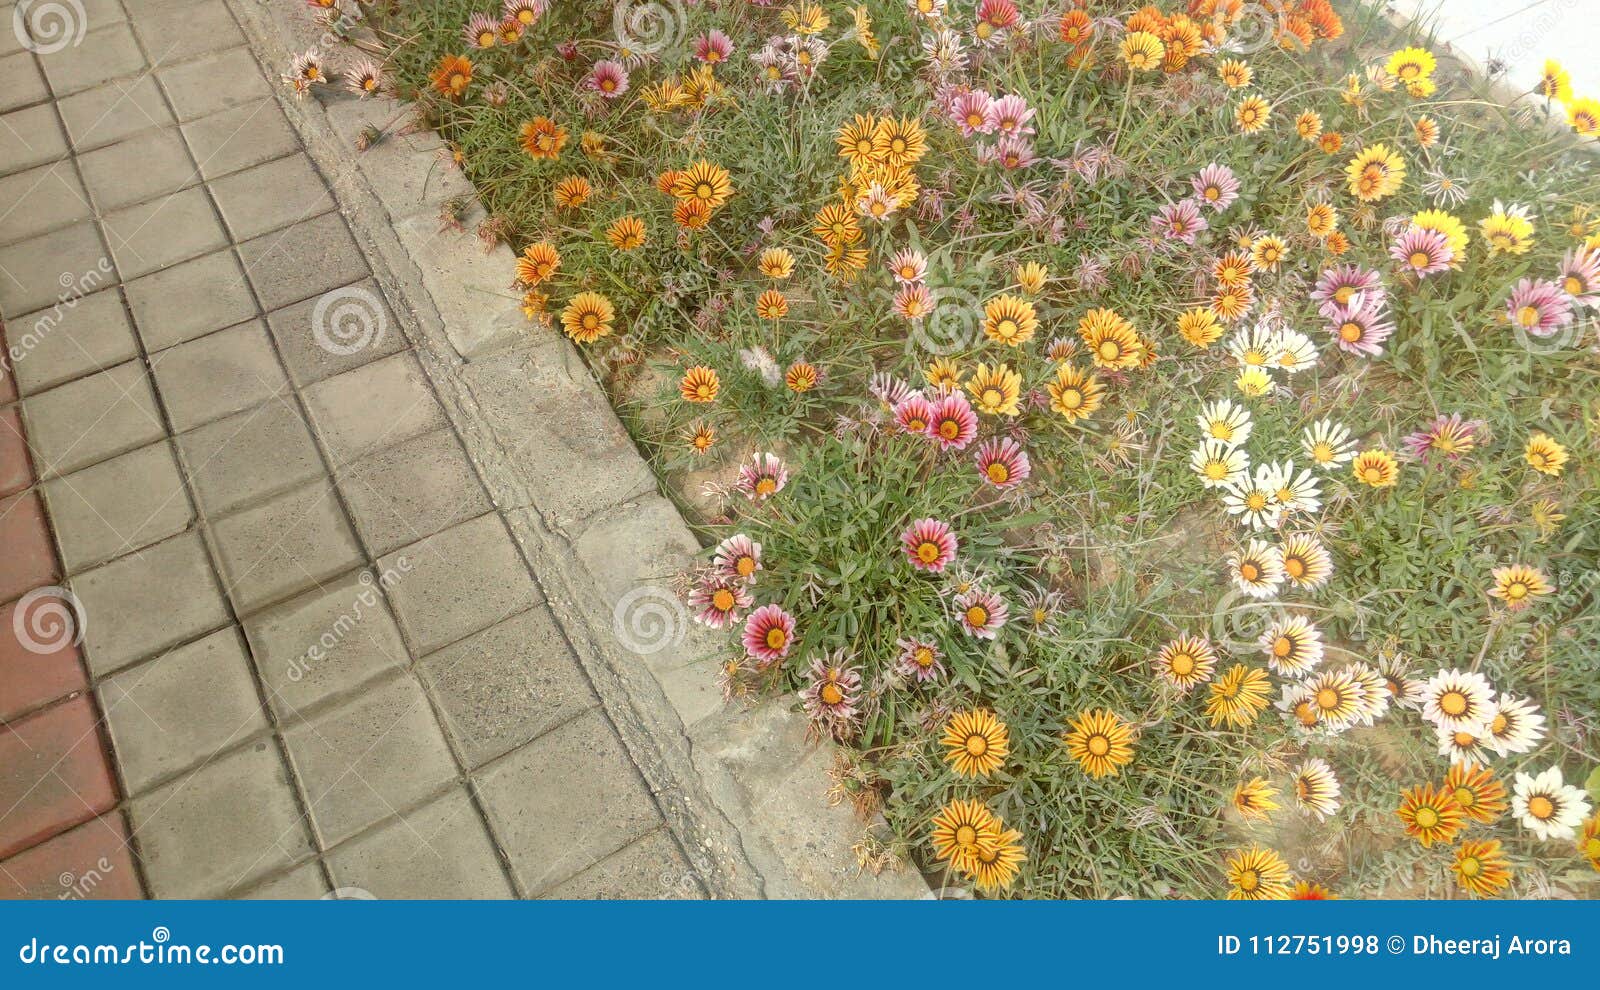 colorful spring flowers and pavement stock photo - image of natural